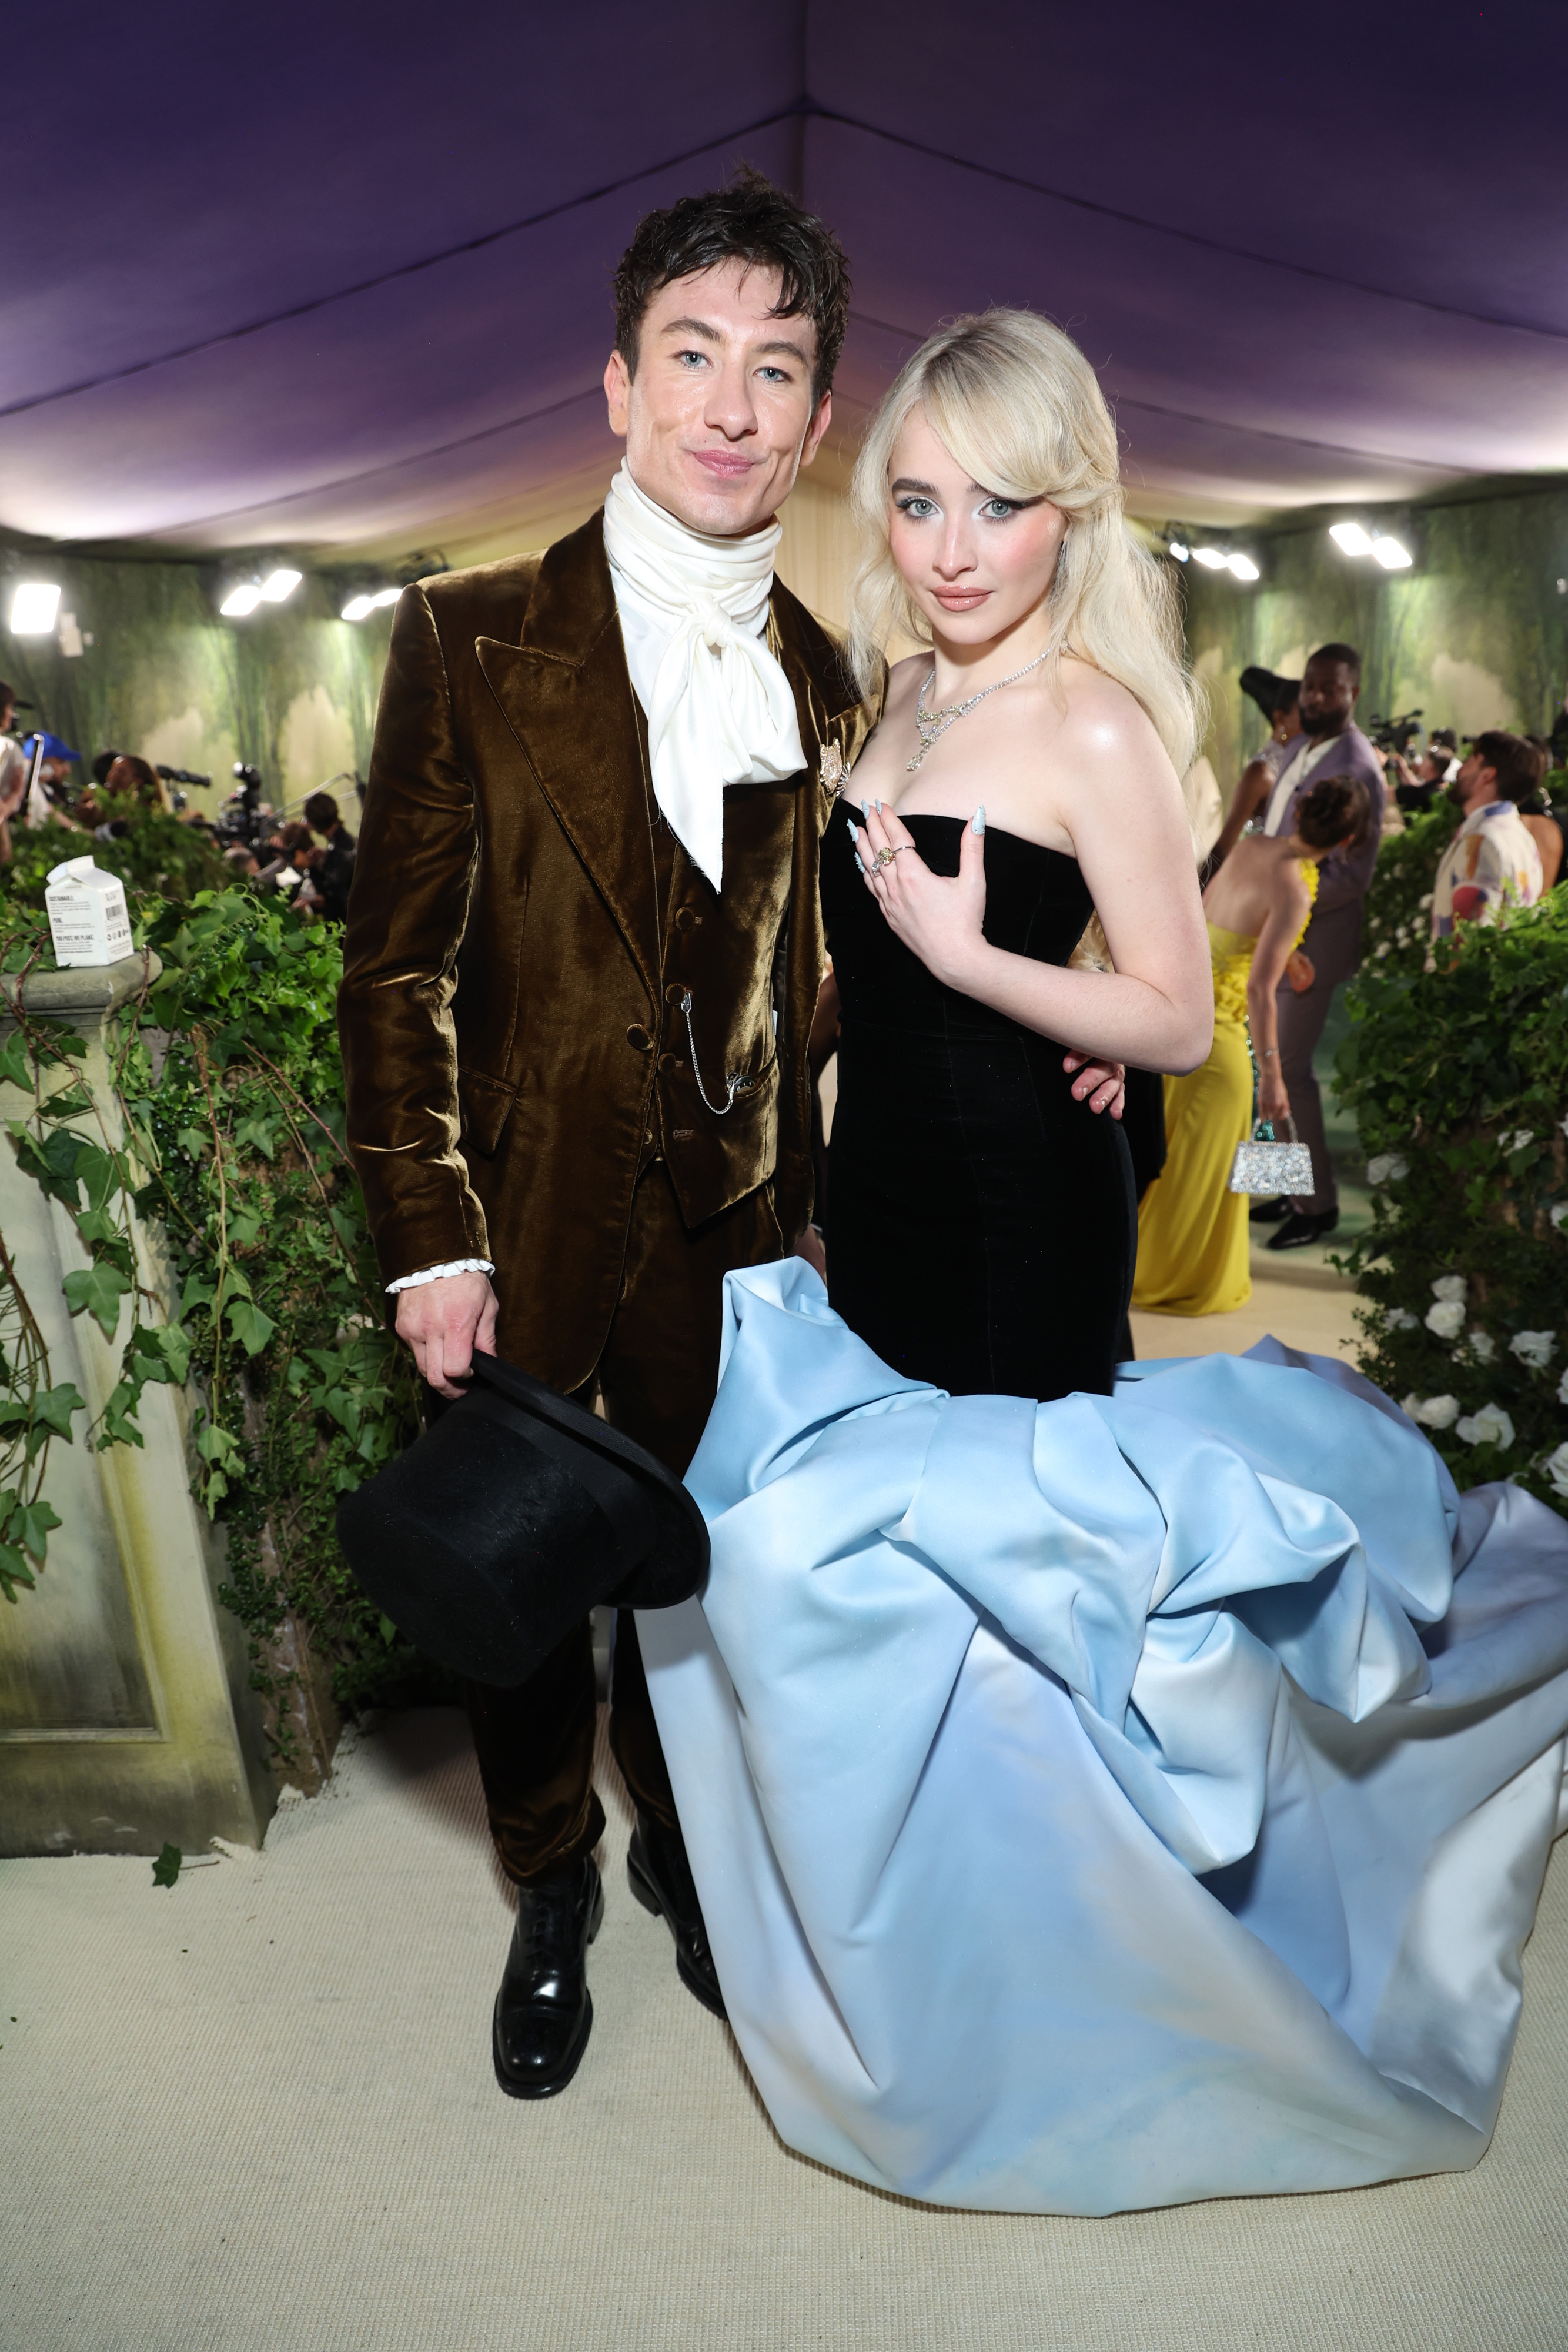 Sabrina attended the Met Gala with her boyfriend, Barry Keoghan